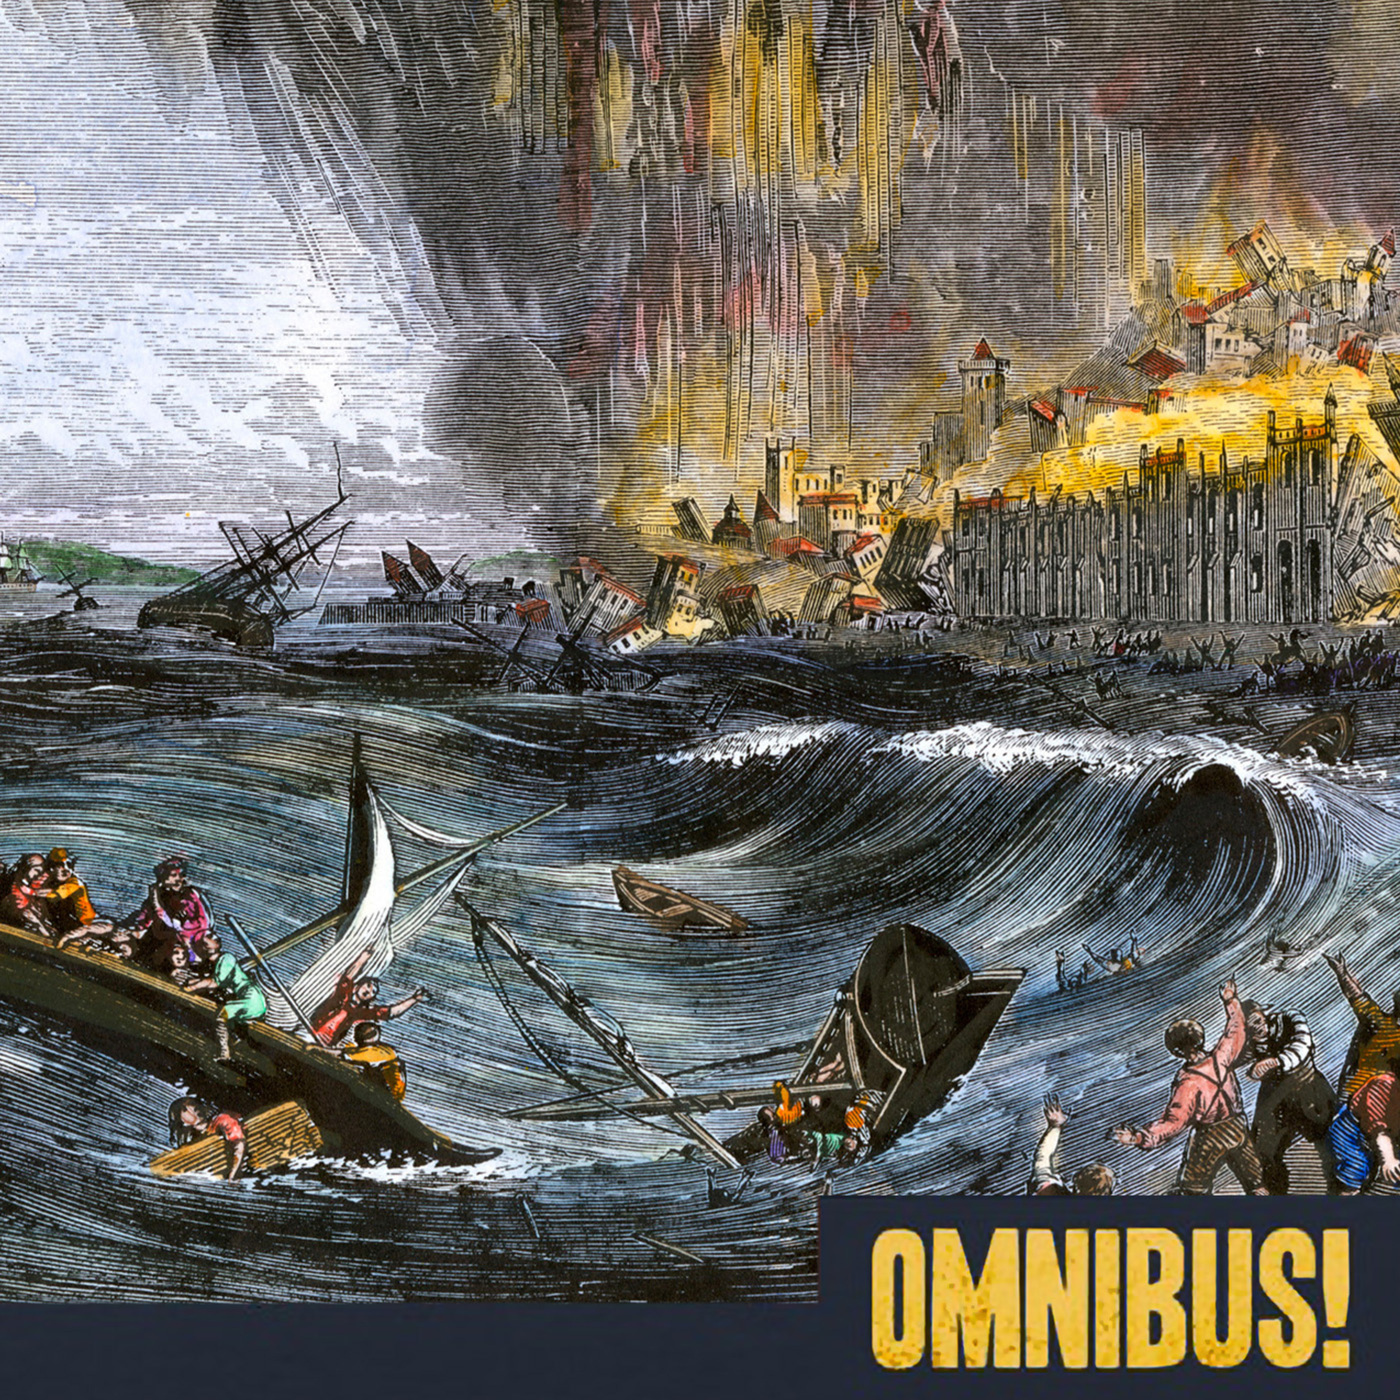 Omnibus Episode 445: The Great Lisbon Earthquake (Entry 548.1S1415)